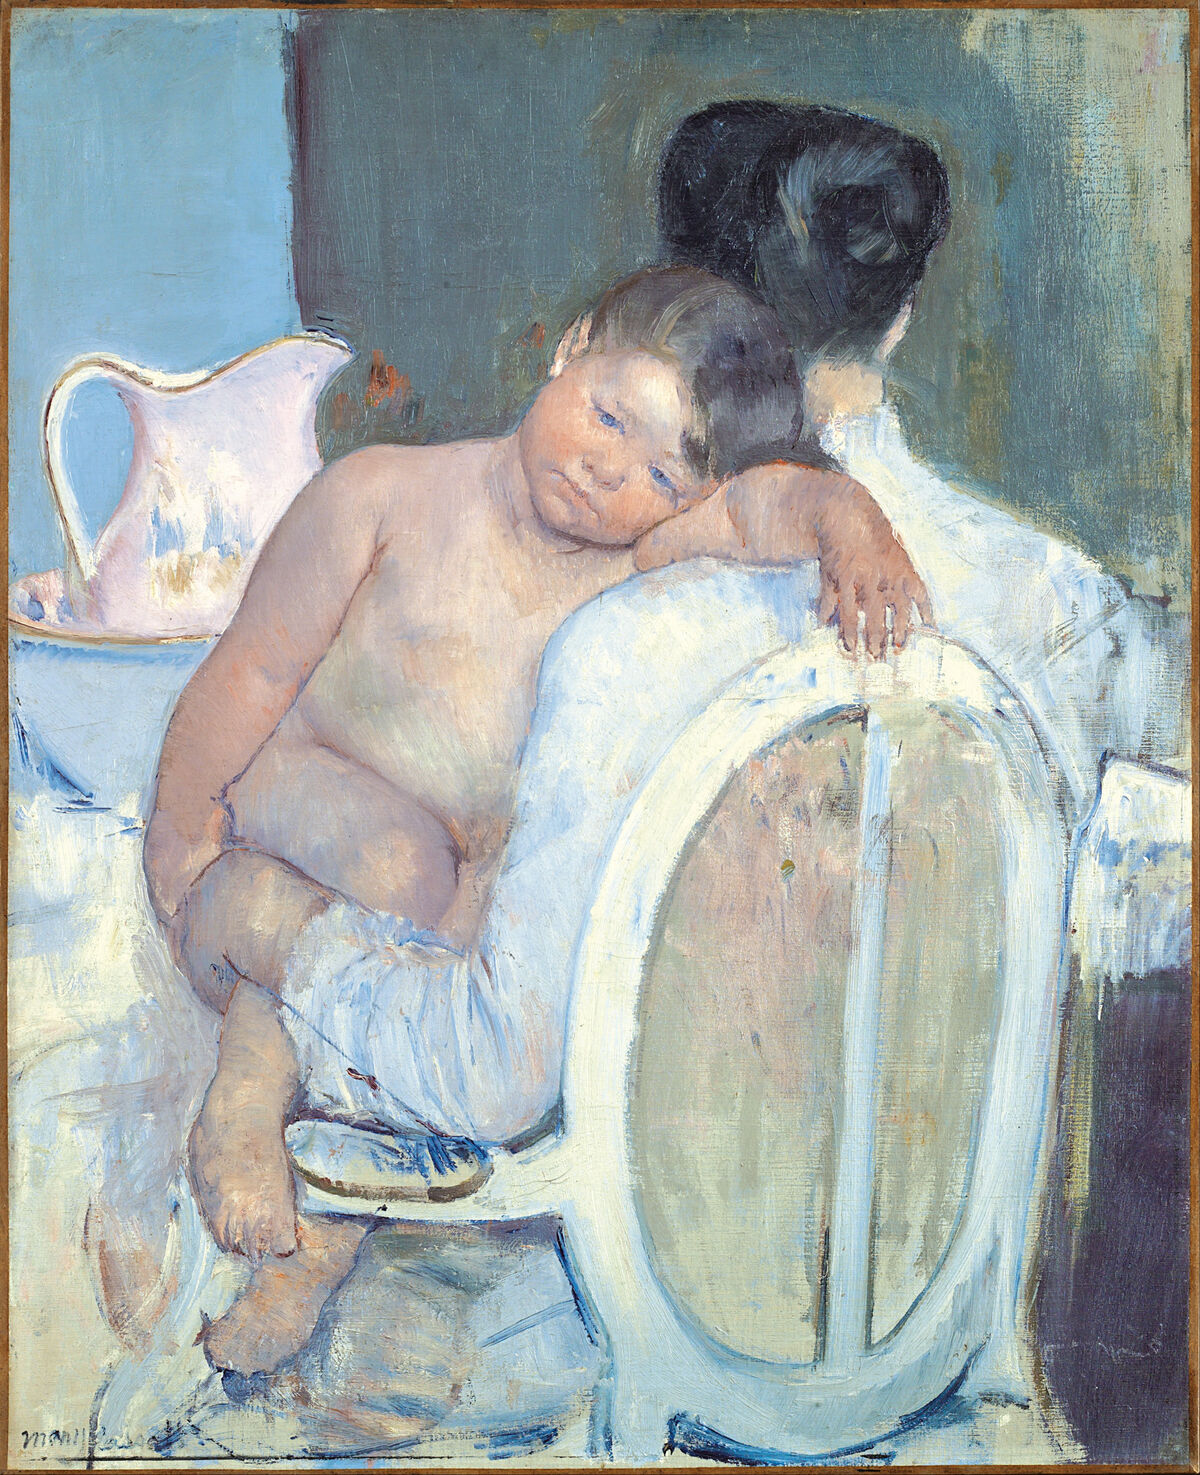 Mary Cassatt, Woman Sitting with a Child in Her Arms, 1890. Image via Wikimedia Commons.